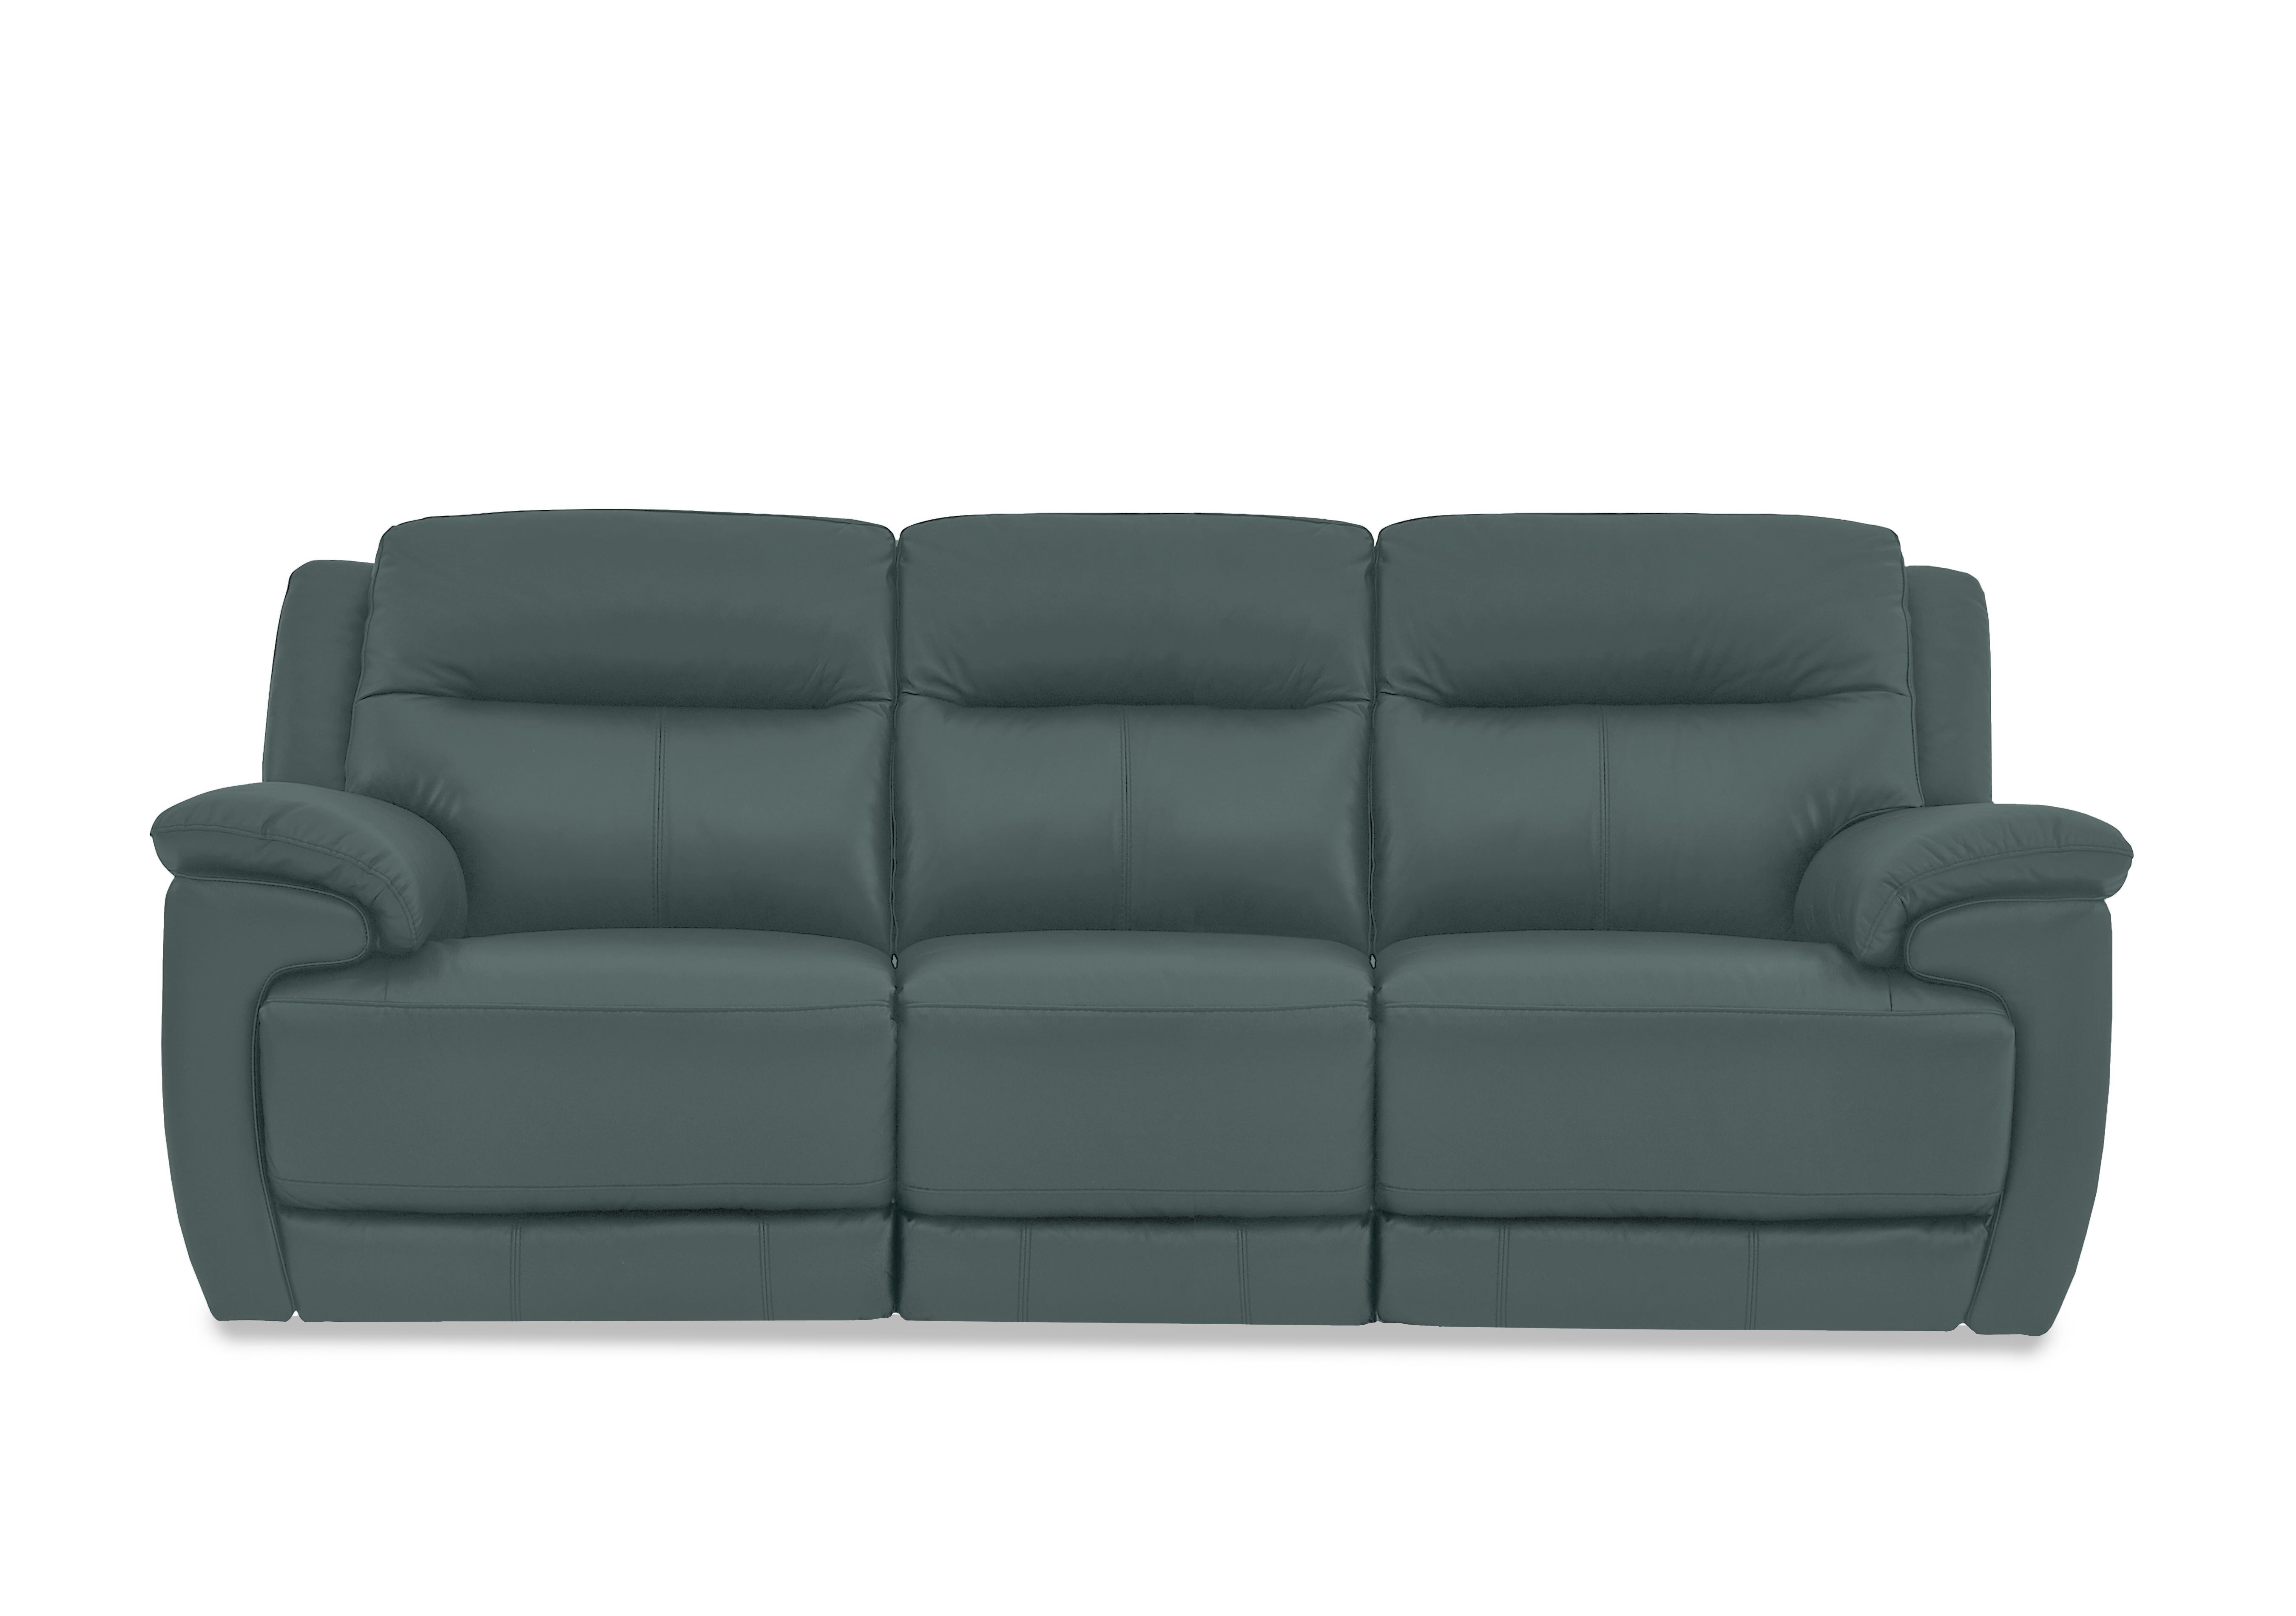 Touch 3 Seater Leather Sofa in Bv-301e Lake Green on Furniture Village